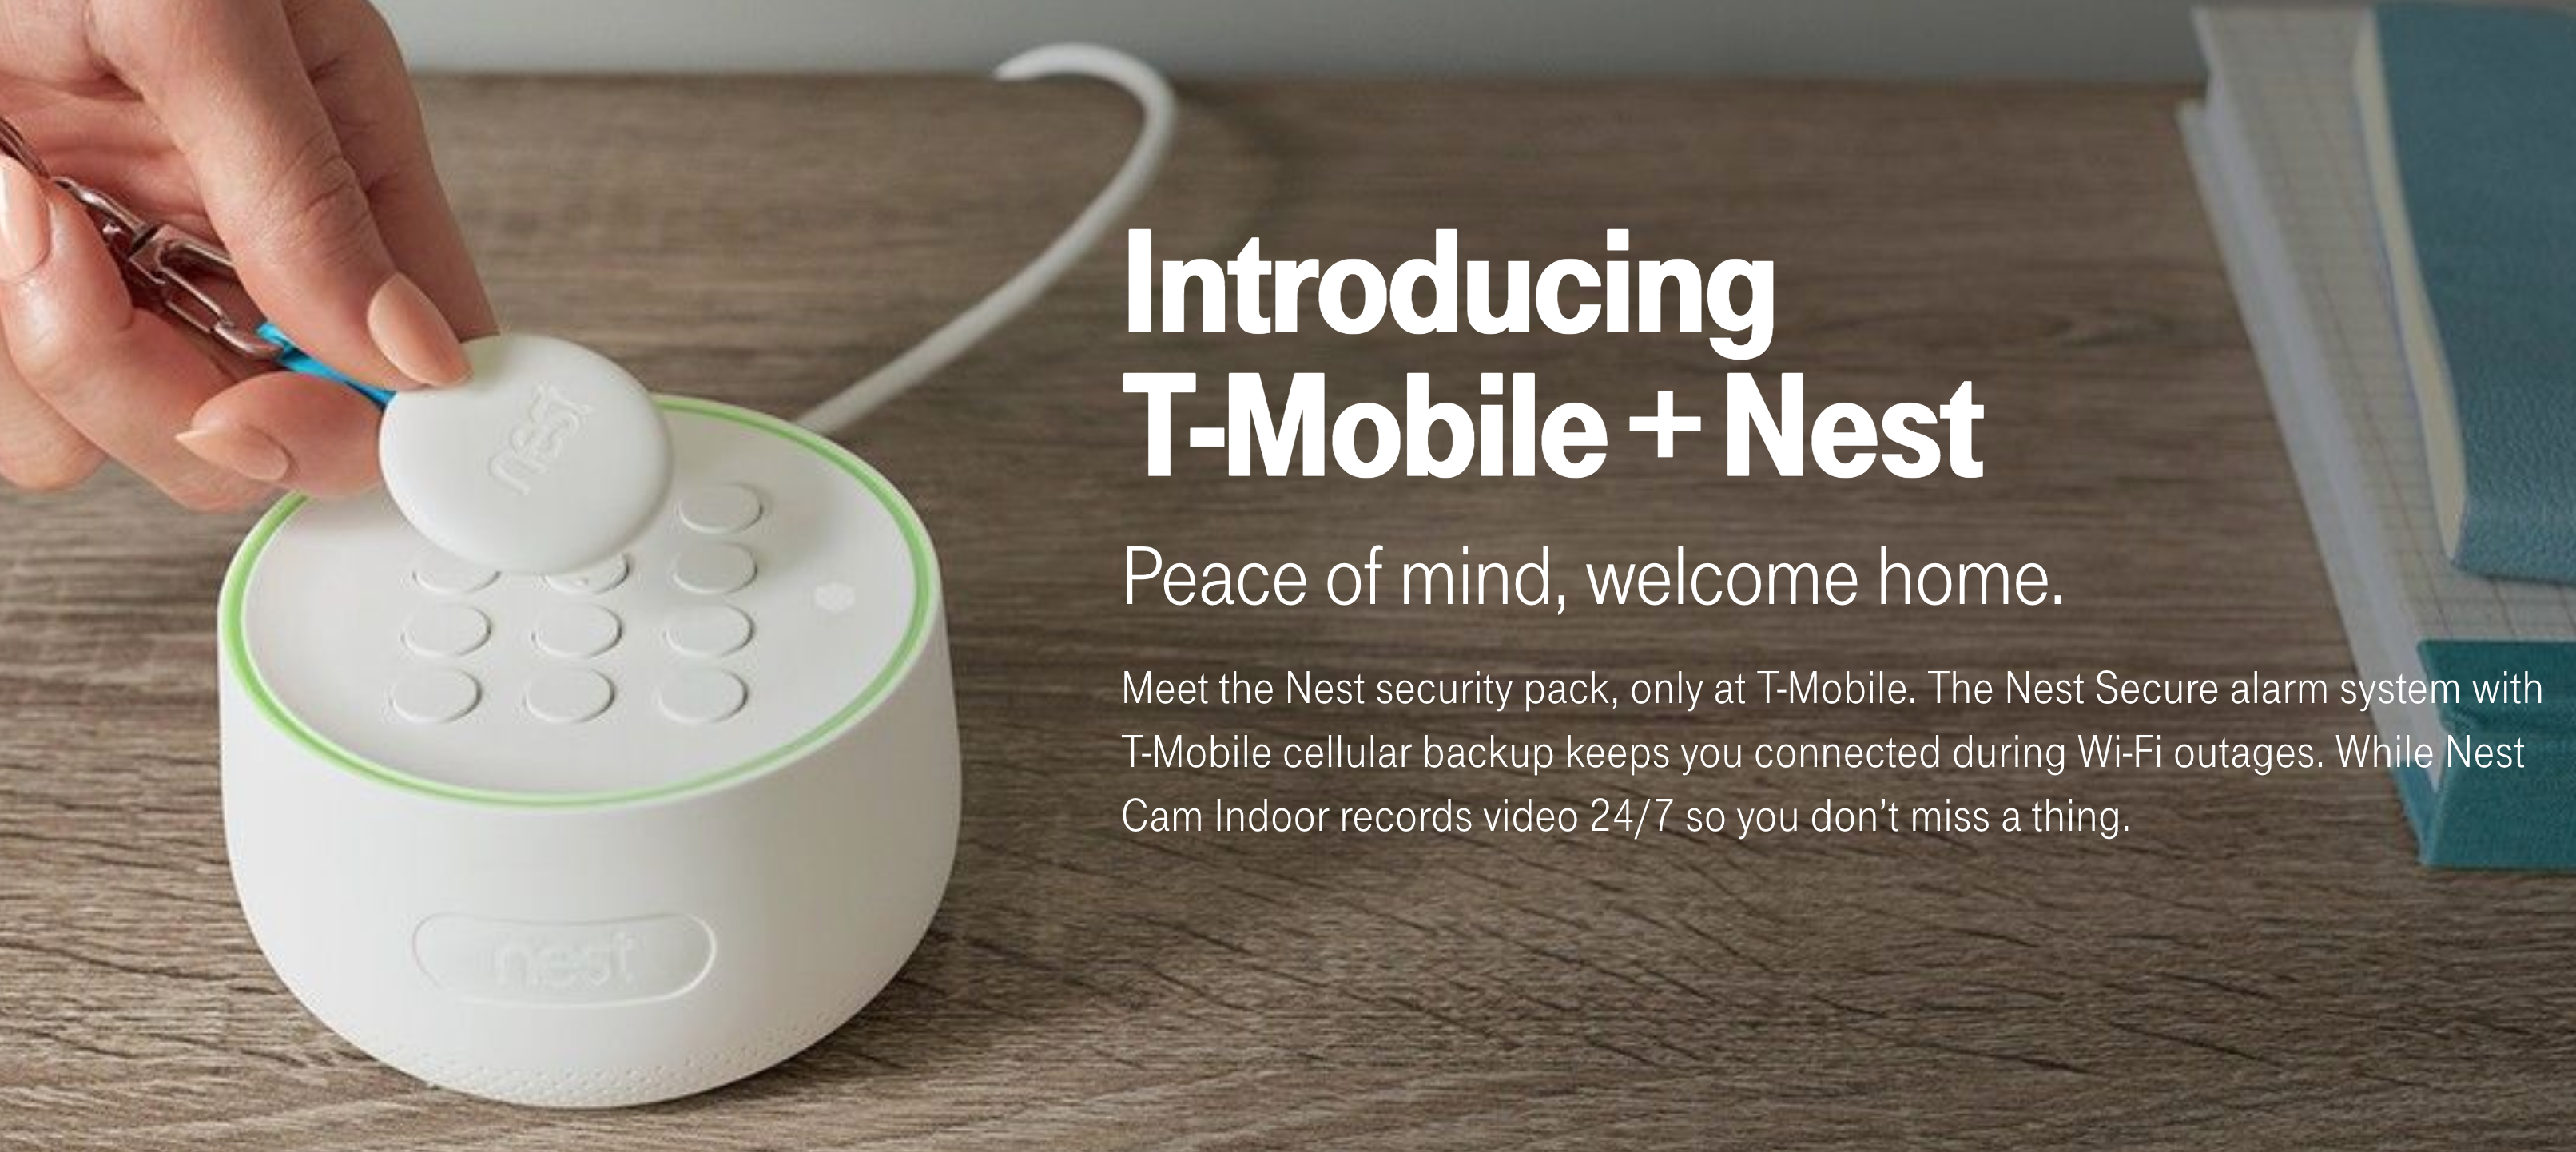 T-Mobile Nest Security Pack aims to 